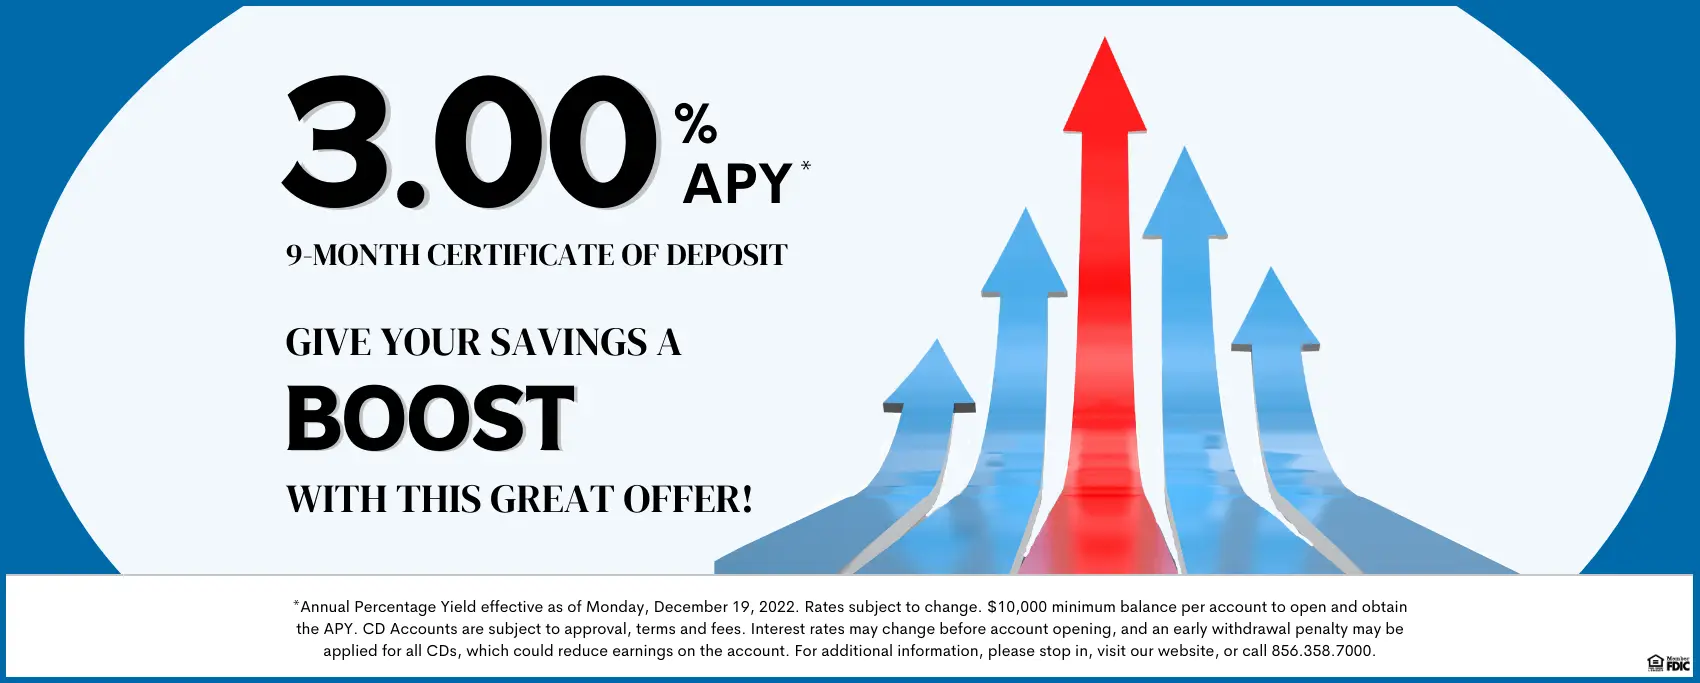 3.00% APY - 9 Month Certificate of Deposit